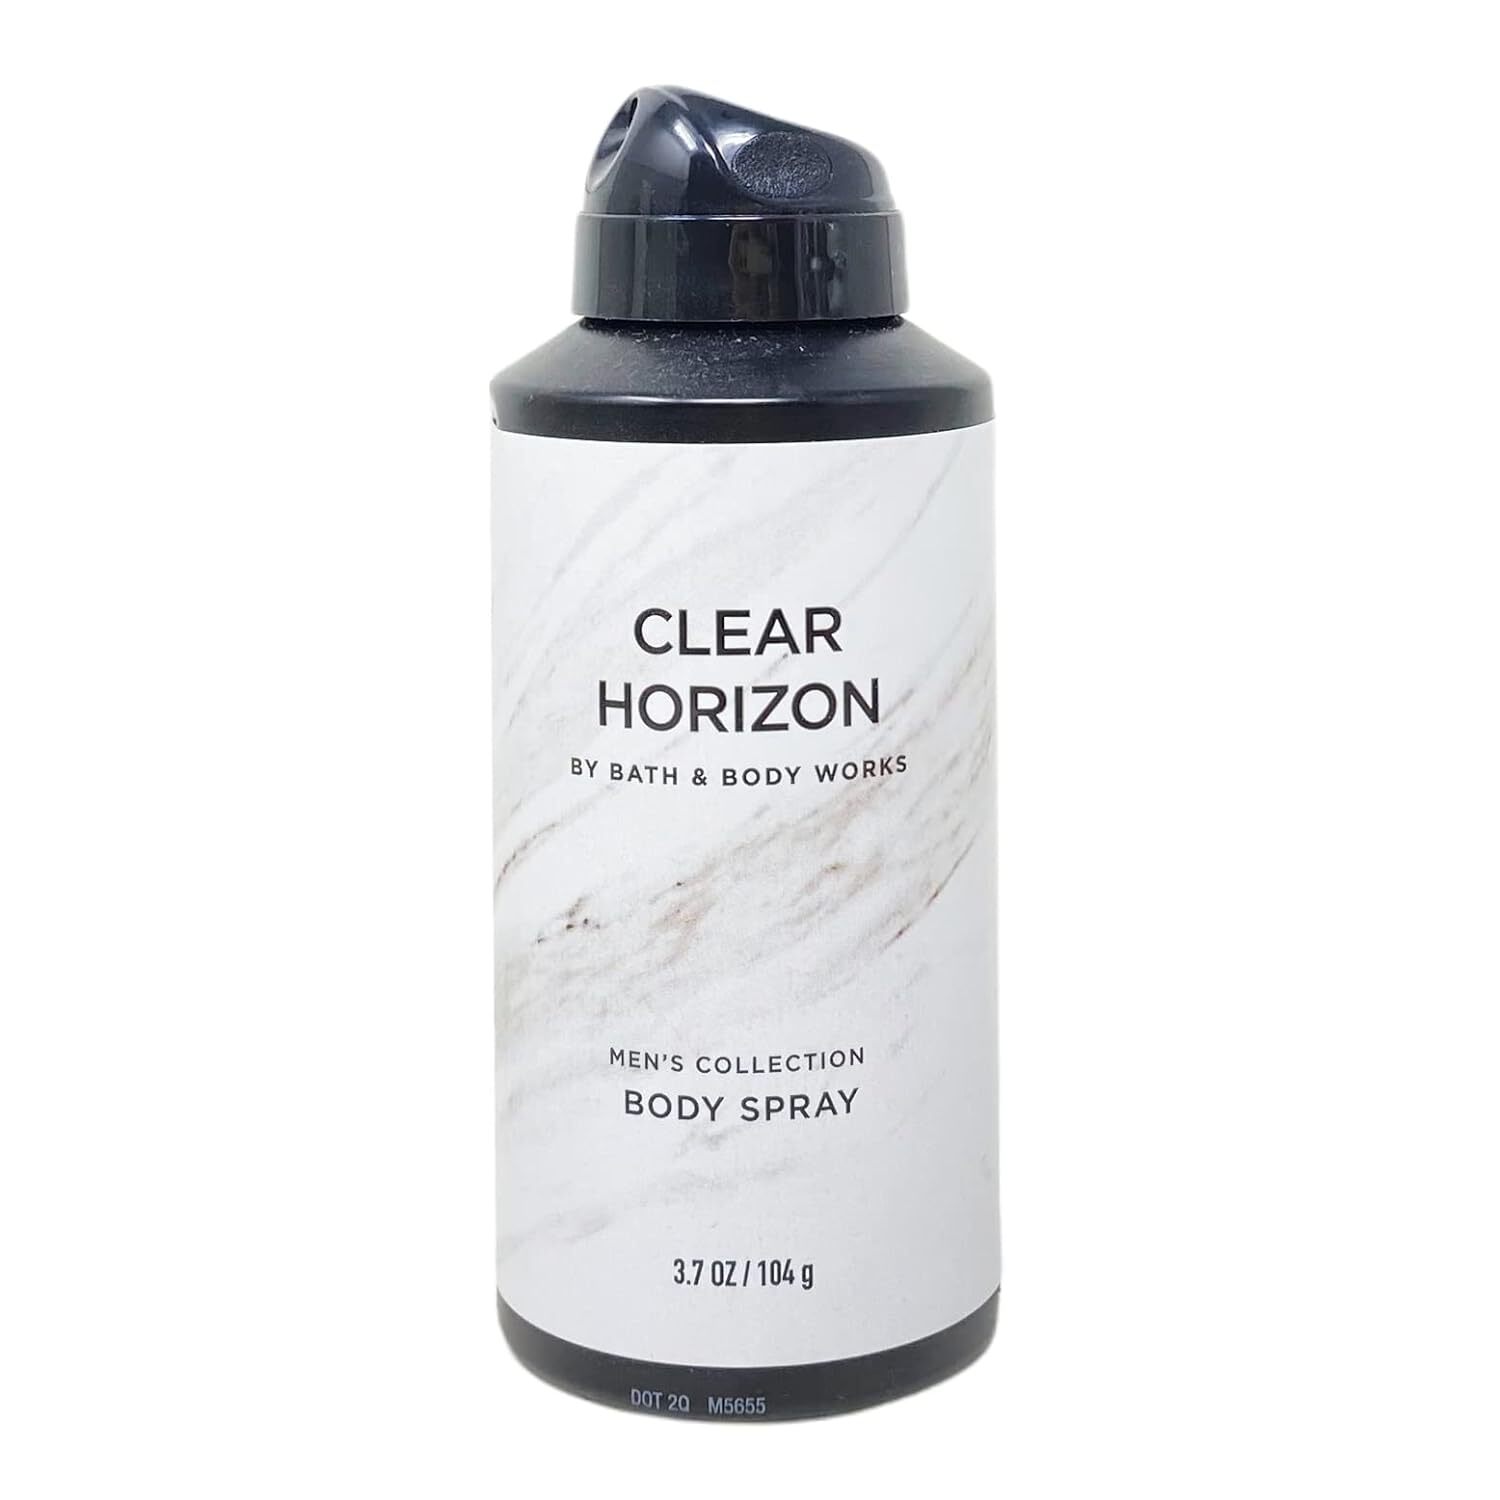 Bath & Body Works Men's Collection Clear Horizon 4 Piece Bundle - Body Cream - 3-in-1 Hair, Face & Body Wash - Body Spray - Cleansing Bar - Full Size